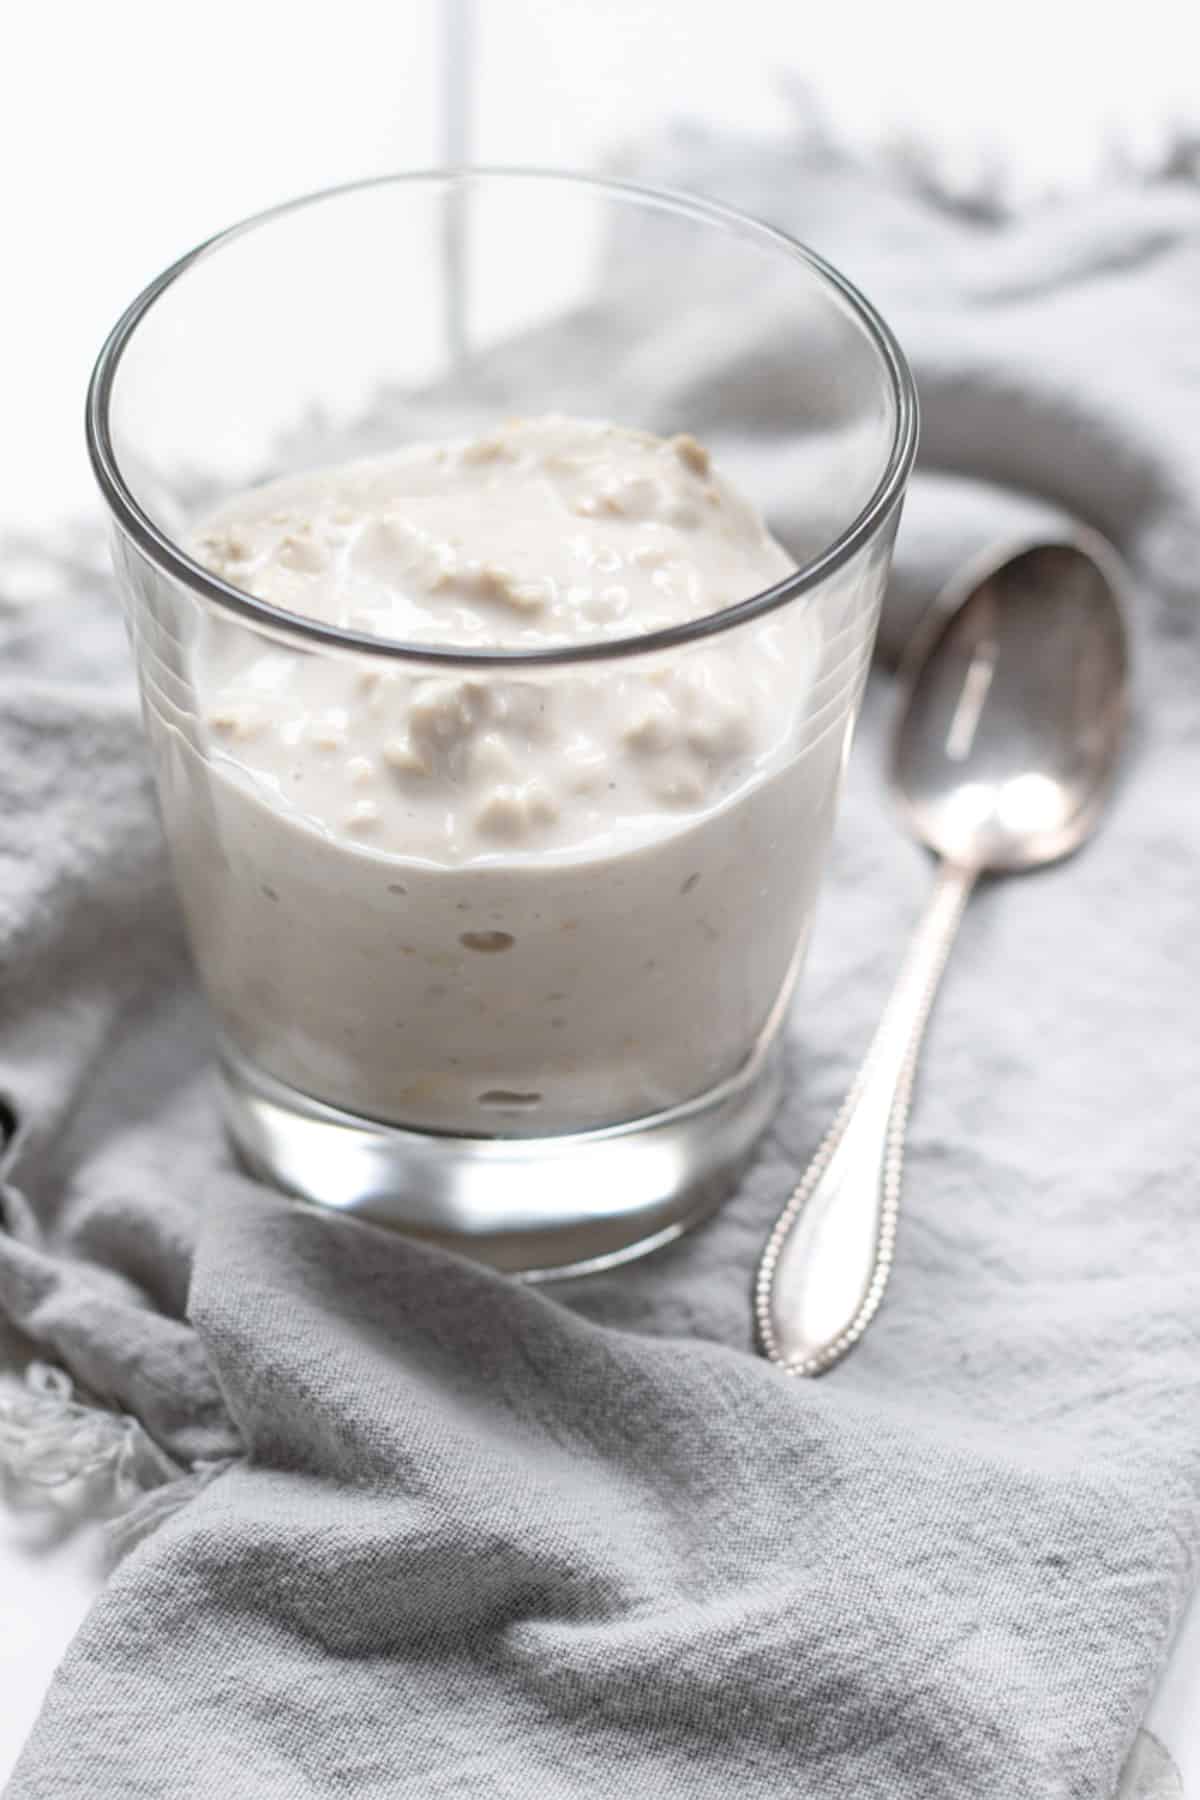 plain oats with yogurt in a jar showing the creamy and thick consistency.